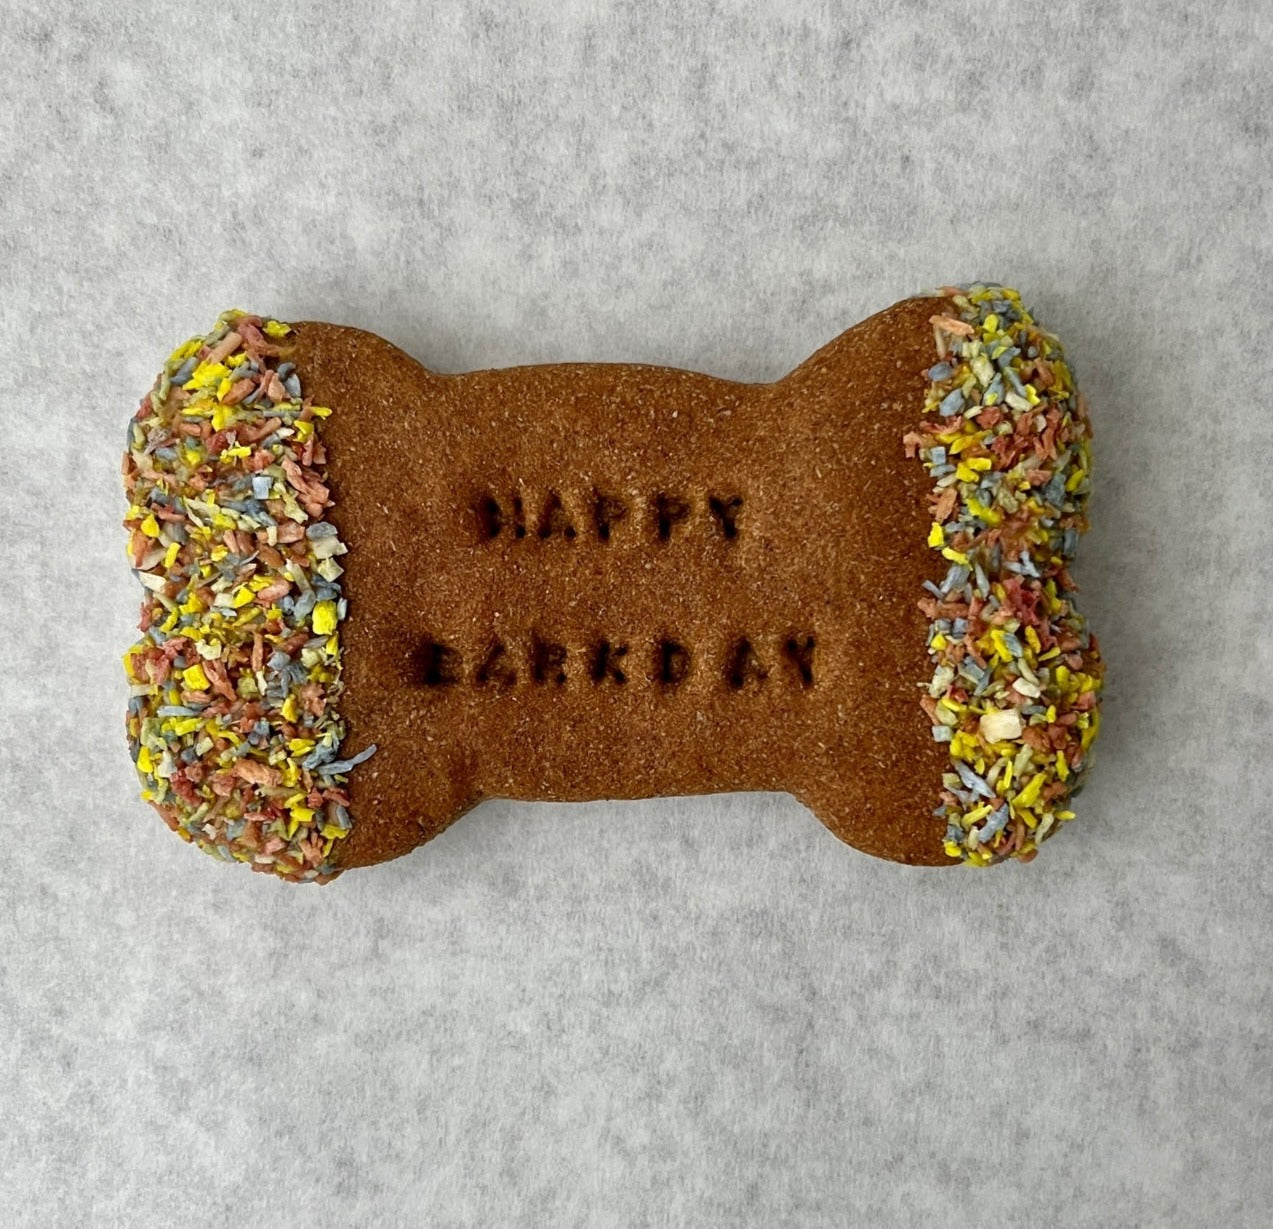 Celebration Dog Biscuits with Applesauce & Peanut Butter- Happy Barkday